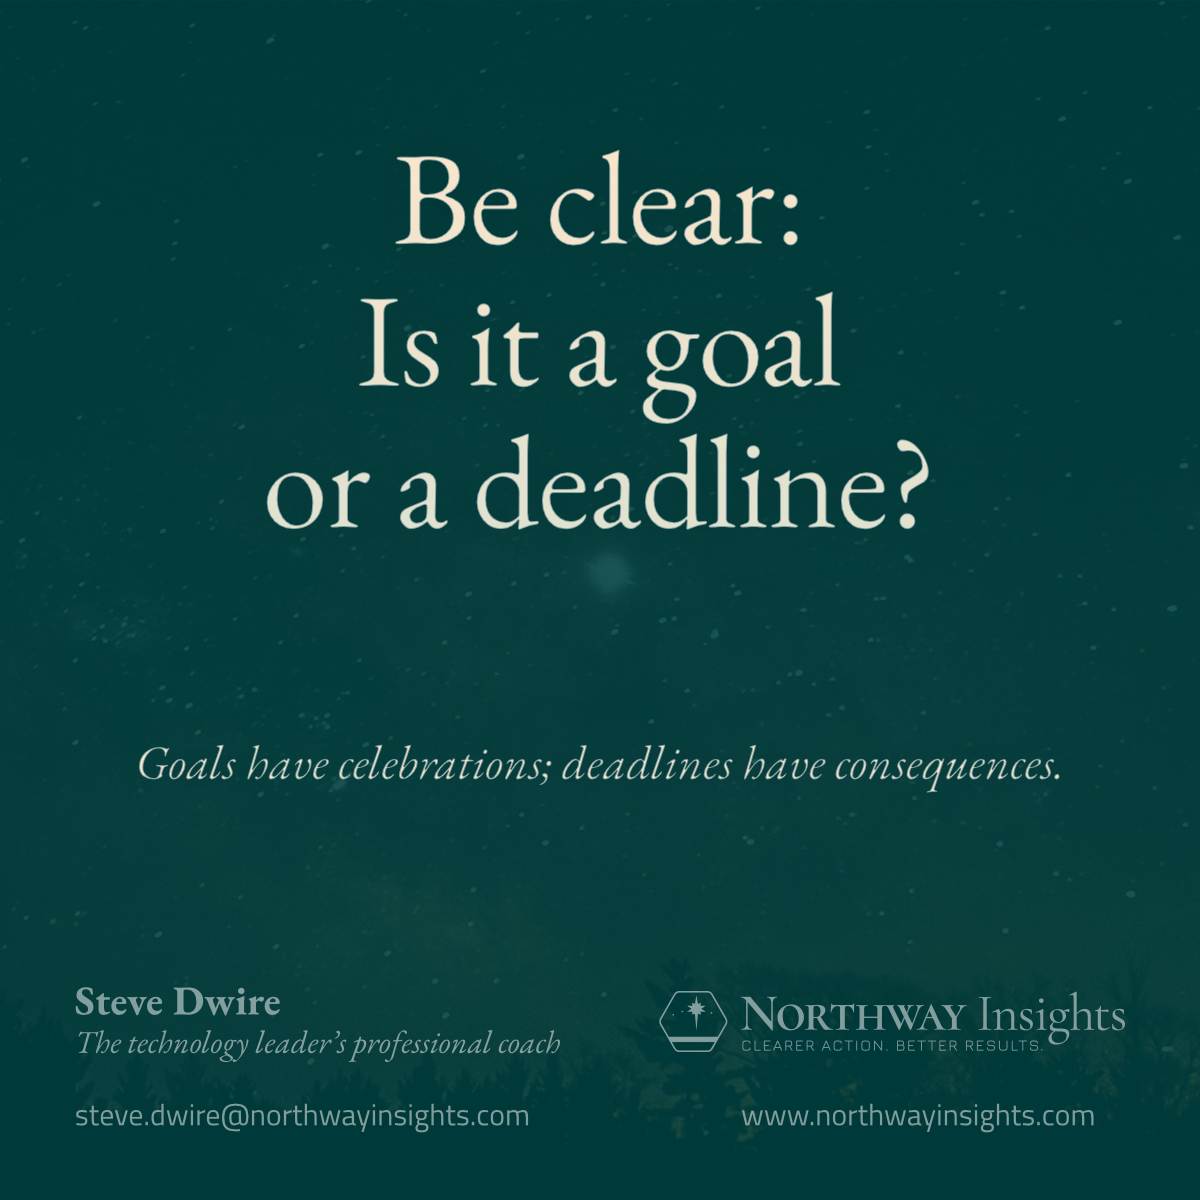 Be clear: Is it a goal or a deadline? (Goals have celebrations; deadlines have consequences.)